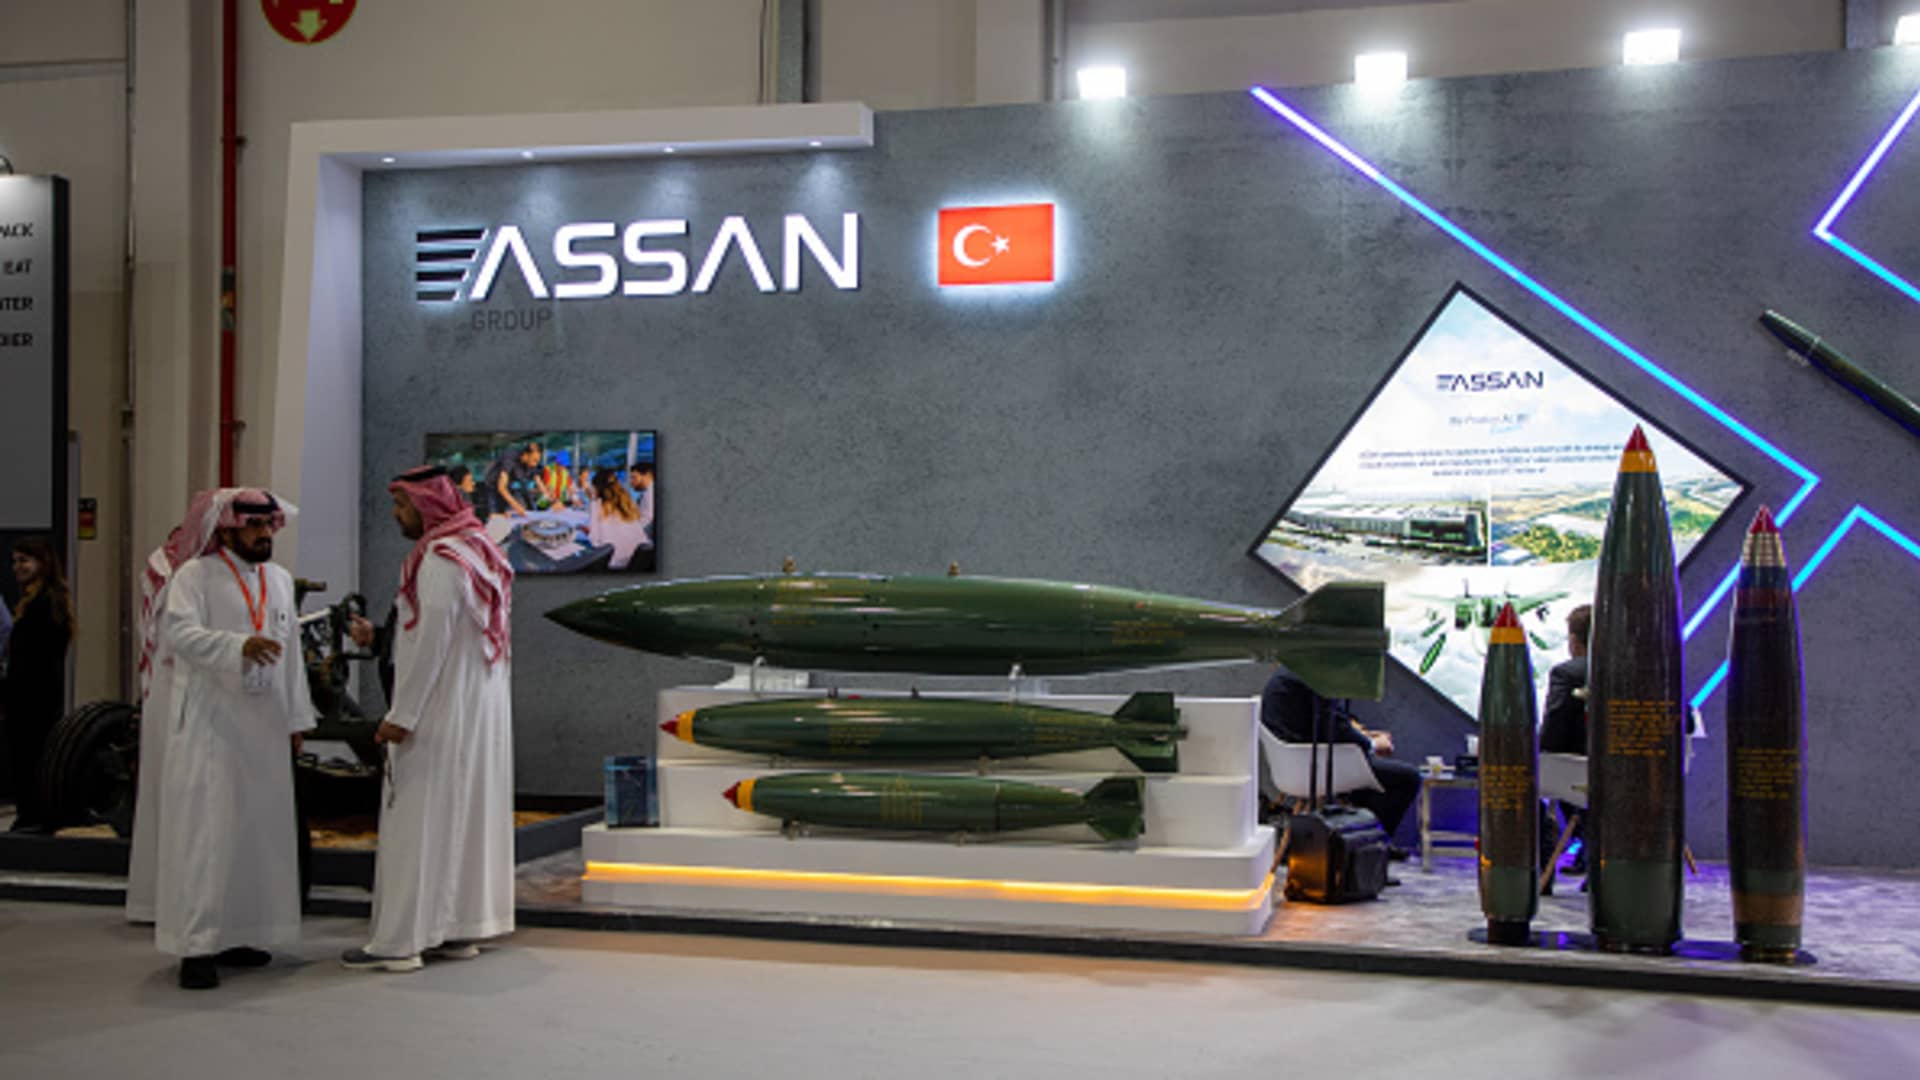 A view from the stand of Turkish ASSAV Defense Company at the 16th edition of International Defense Exhibition and Conference (IDEX) held in Abu Dhabi, United Arab Emirates, February 21 2023.